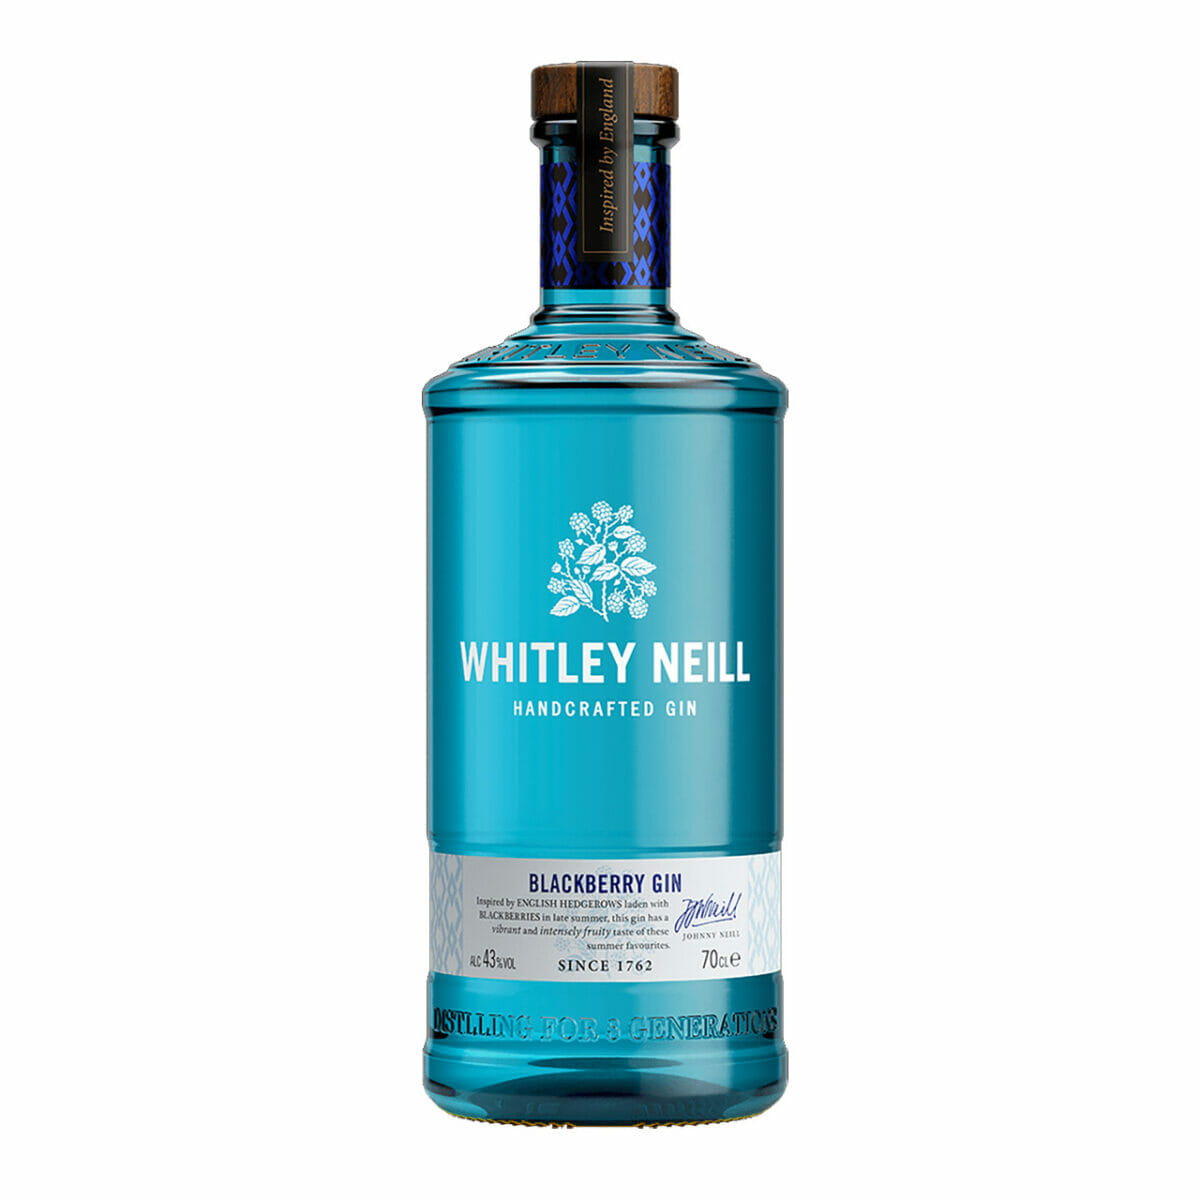 Whitley Neill | Blackberry Gin - 43 -  70cl - Kingdom, United